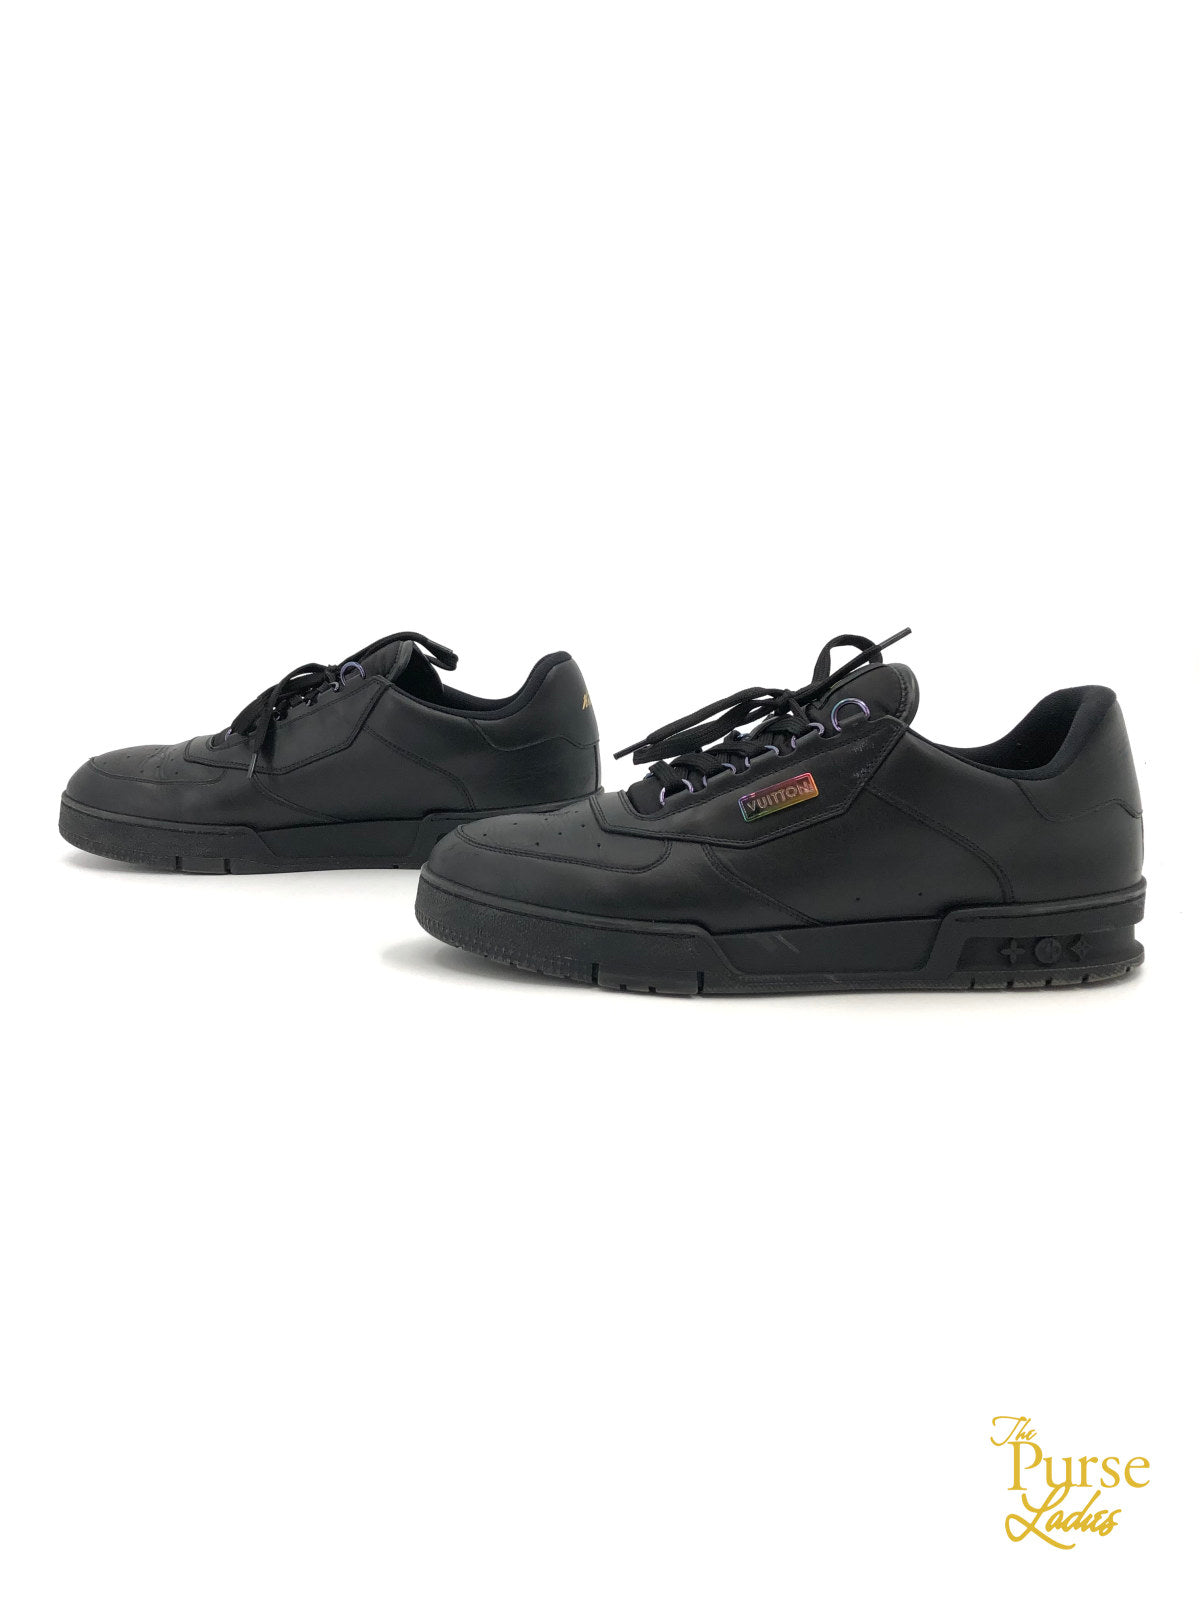 Lv trainer leather low trainers Louis Vuitton Black size 9.5 UK in Leather  - 32039934